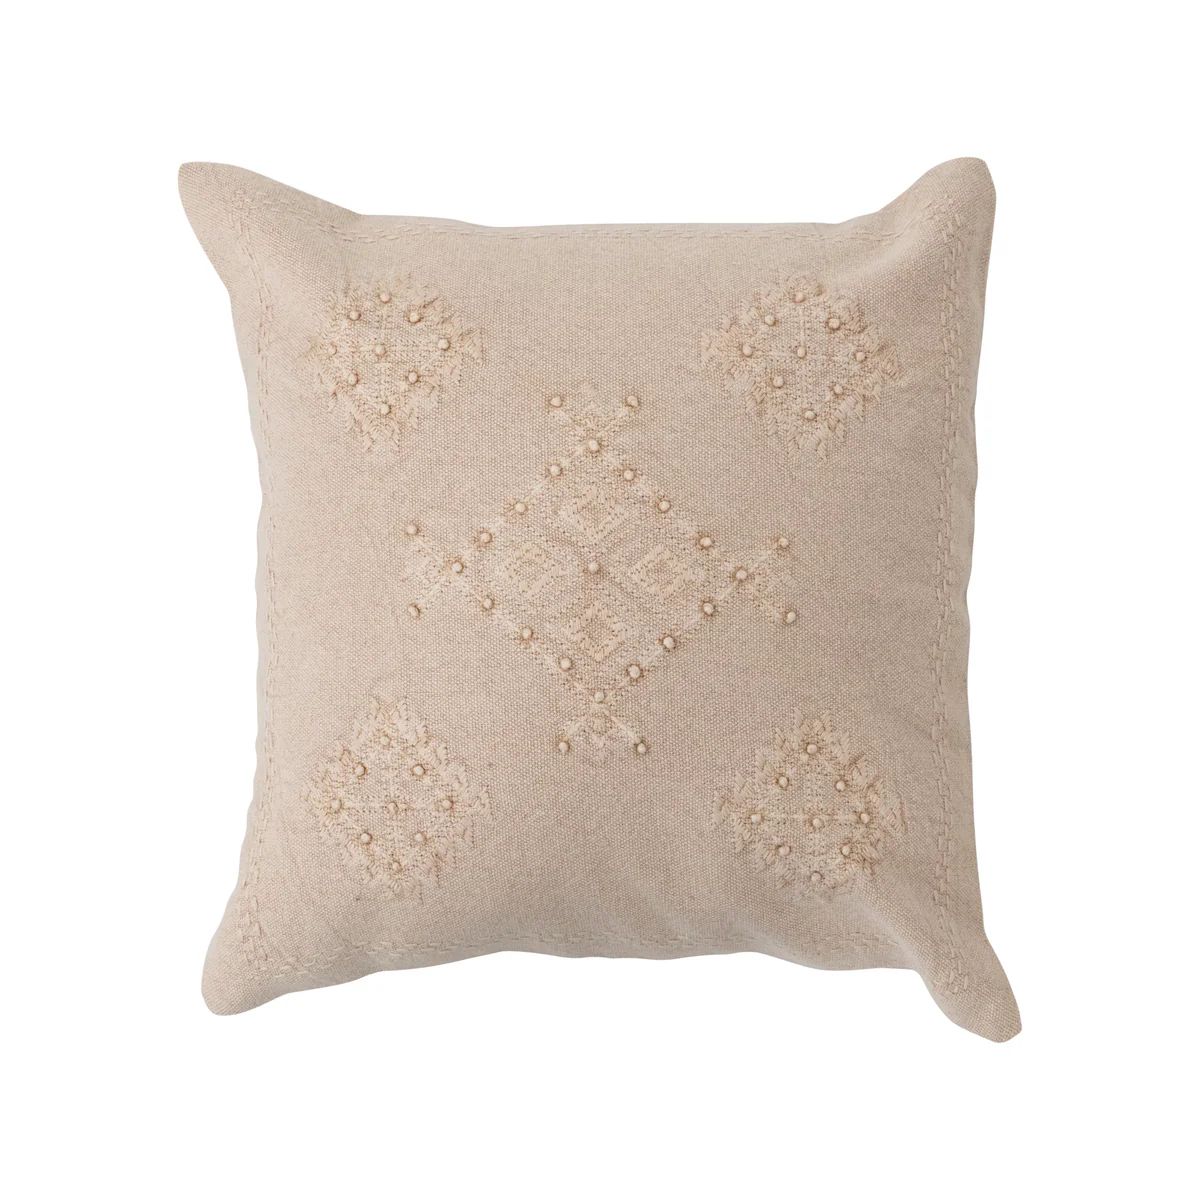 Embroidered Woven Cotton Pillow with French Knots | APIARY by The Busy Bee